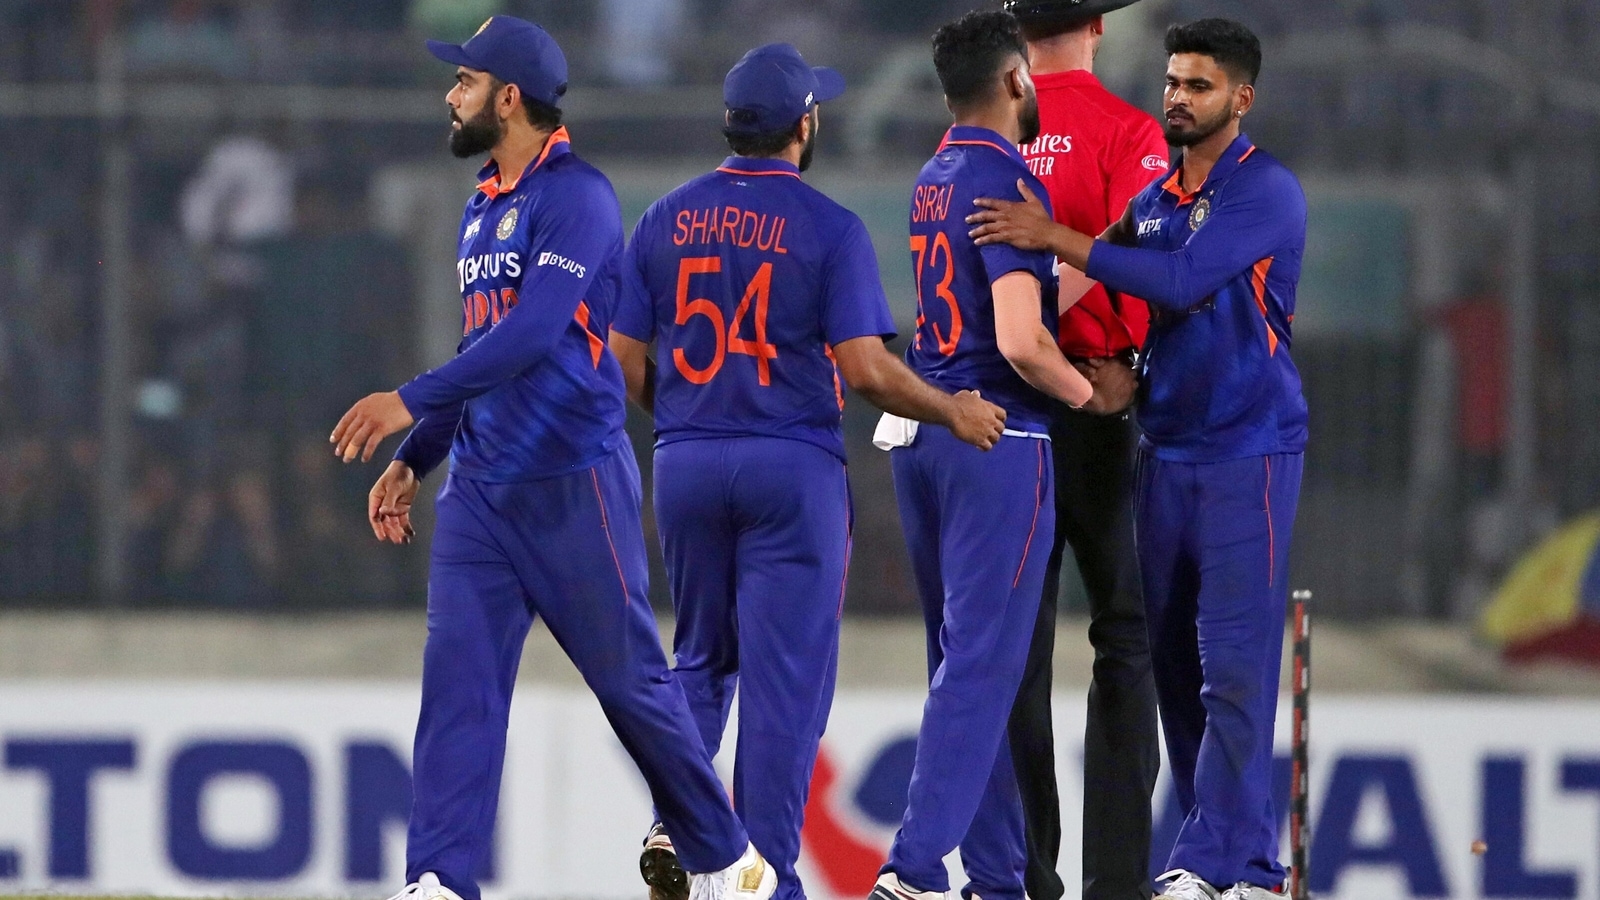 India vs Bangladesh 2nd ODI LIVE streaming When and where to watch